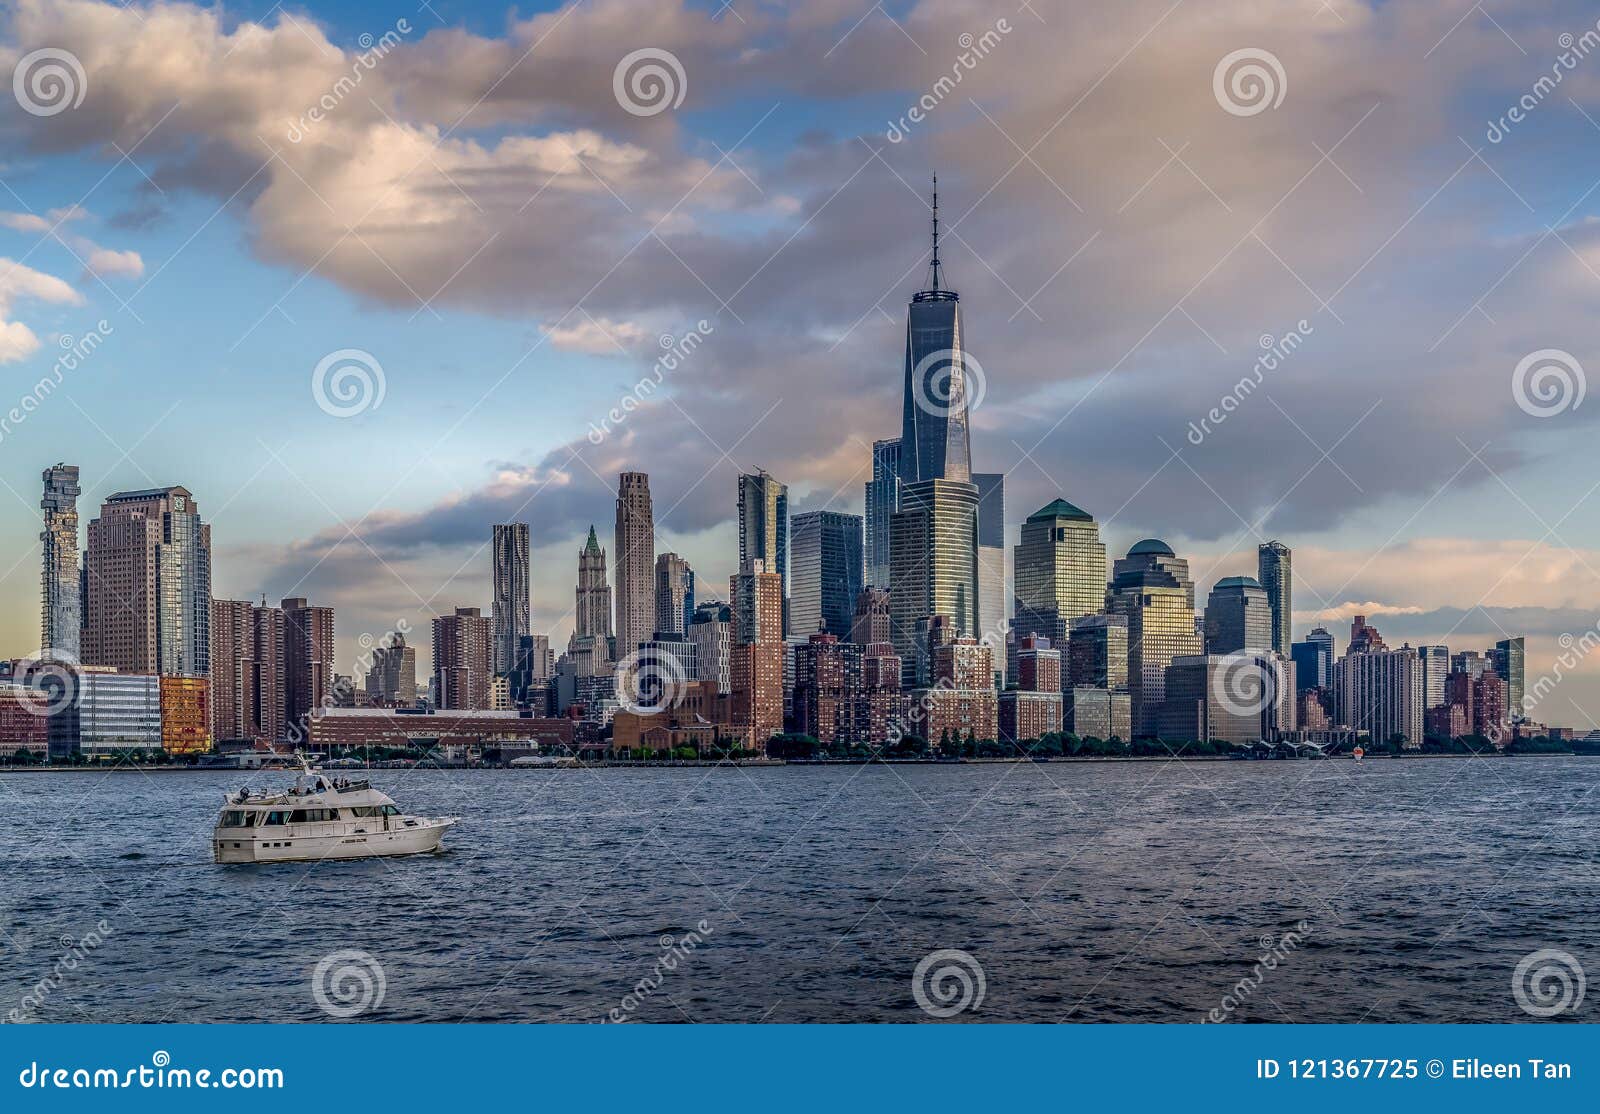 view of nyc skyline at sunset